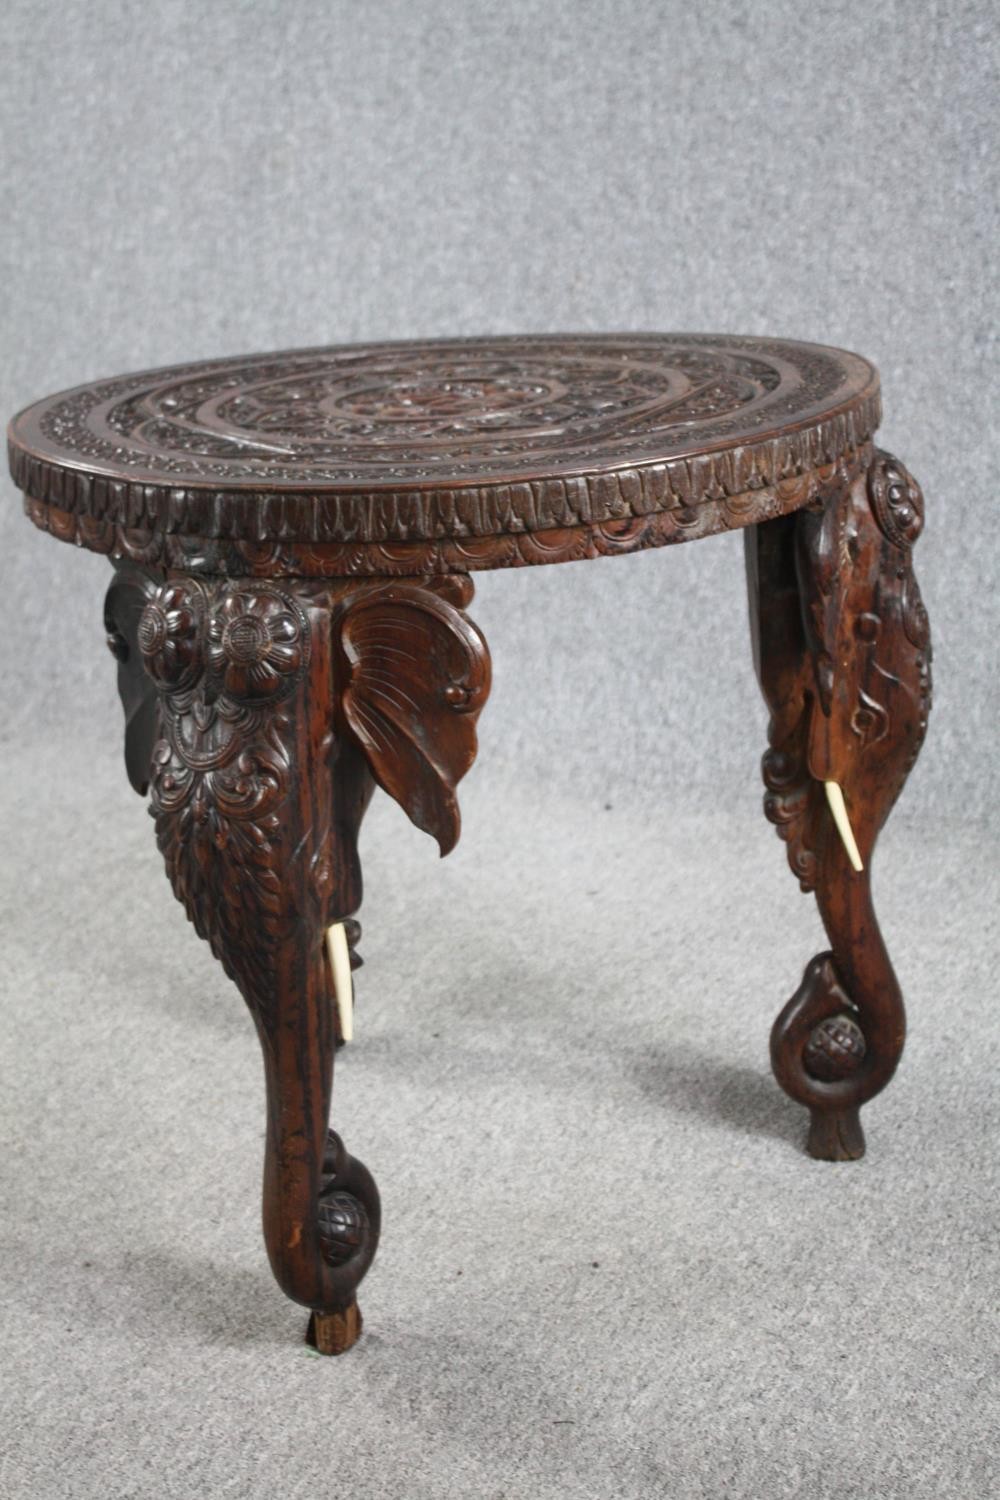 Lamp or occasional table, eastern carved hardwood with elephant supports and bone tusks. H.62 Dia. - Image 4 of 5